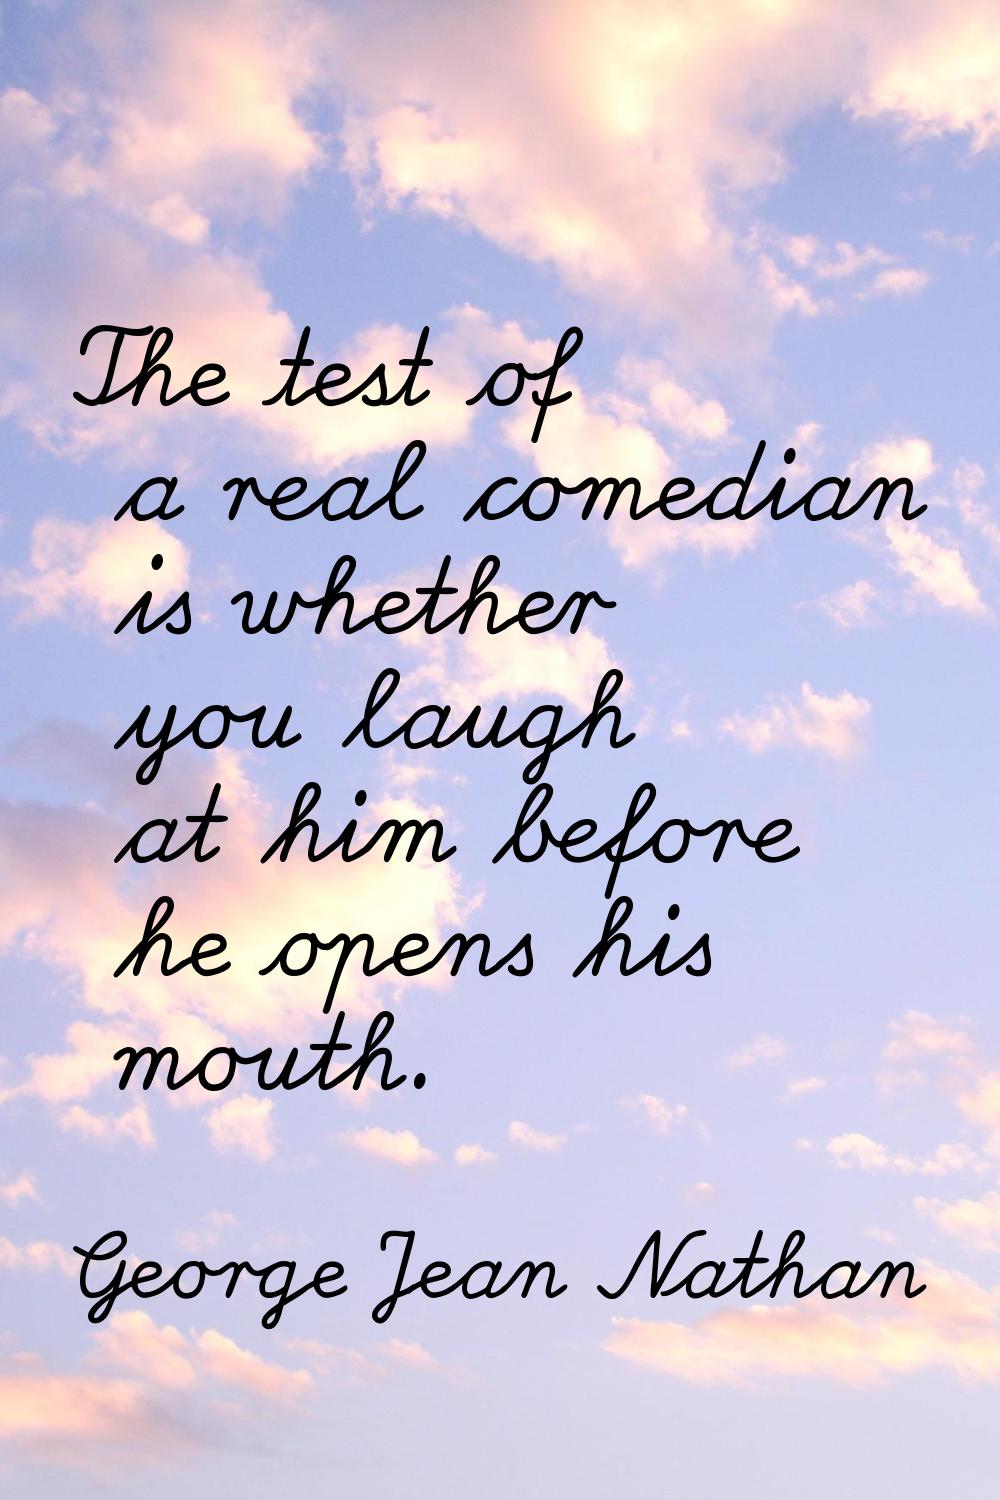 The test of a real comedian is whether you laugh at him before he opens his mouth.